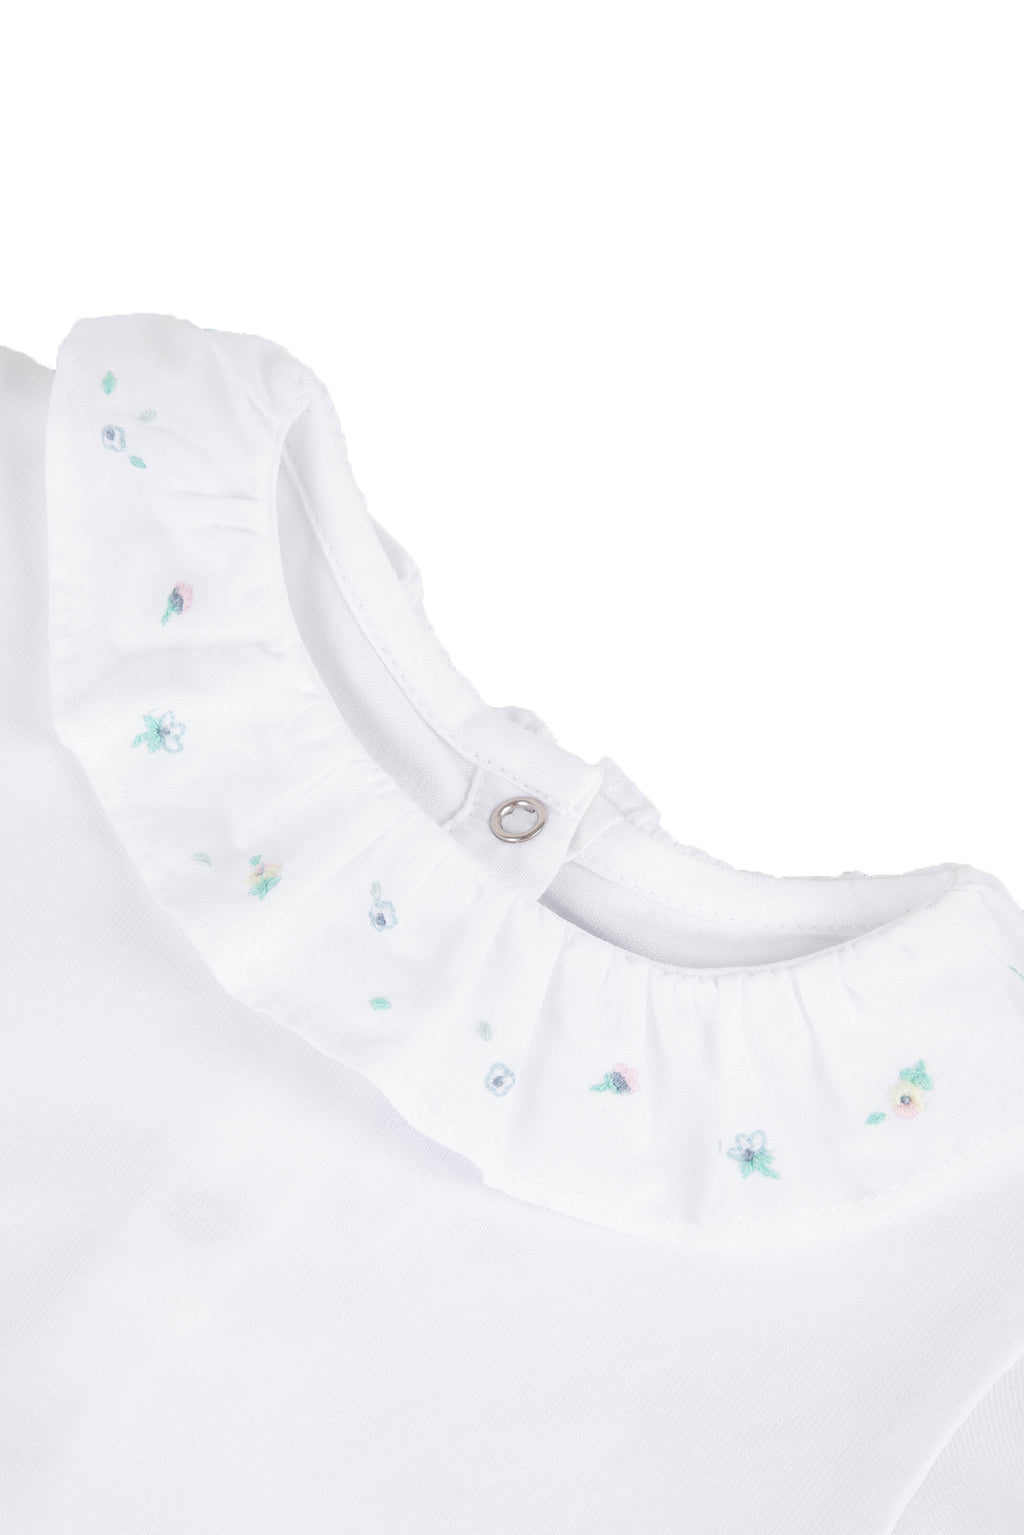 Body - Yellow Collar Embroidered